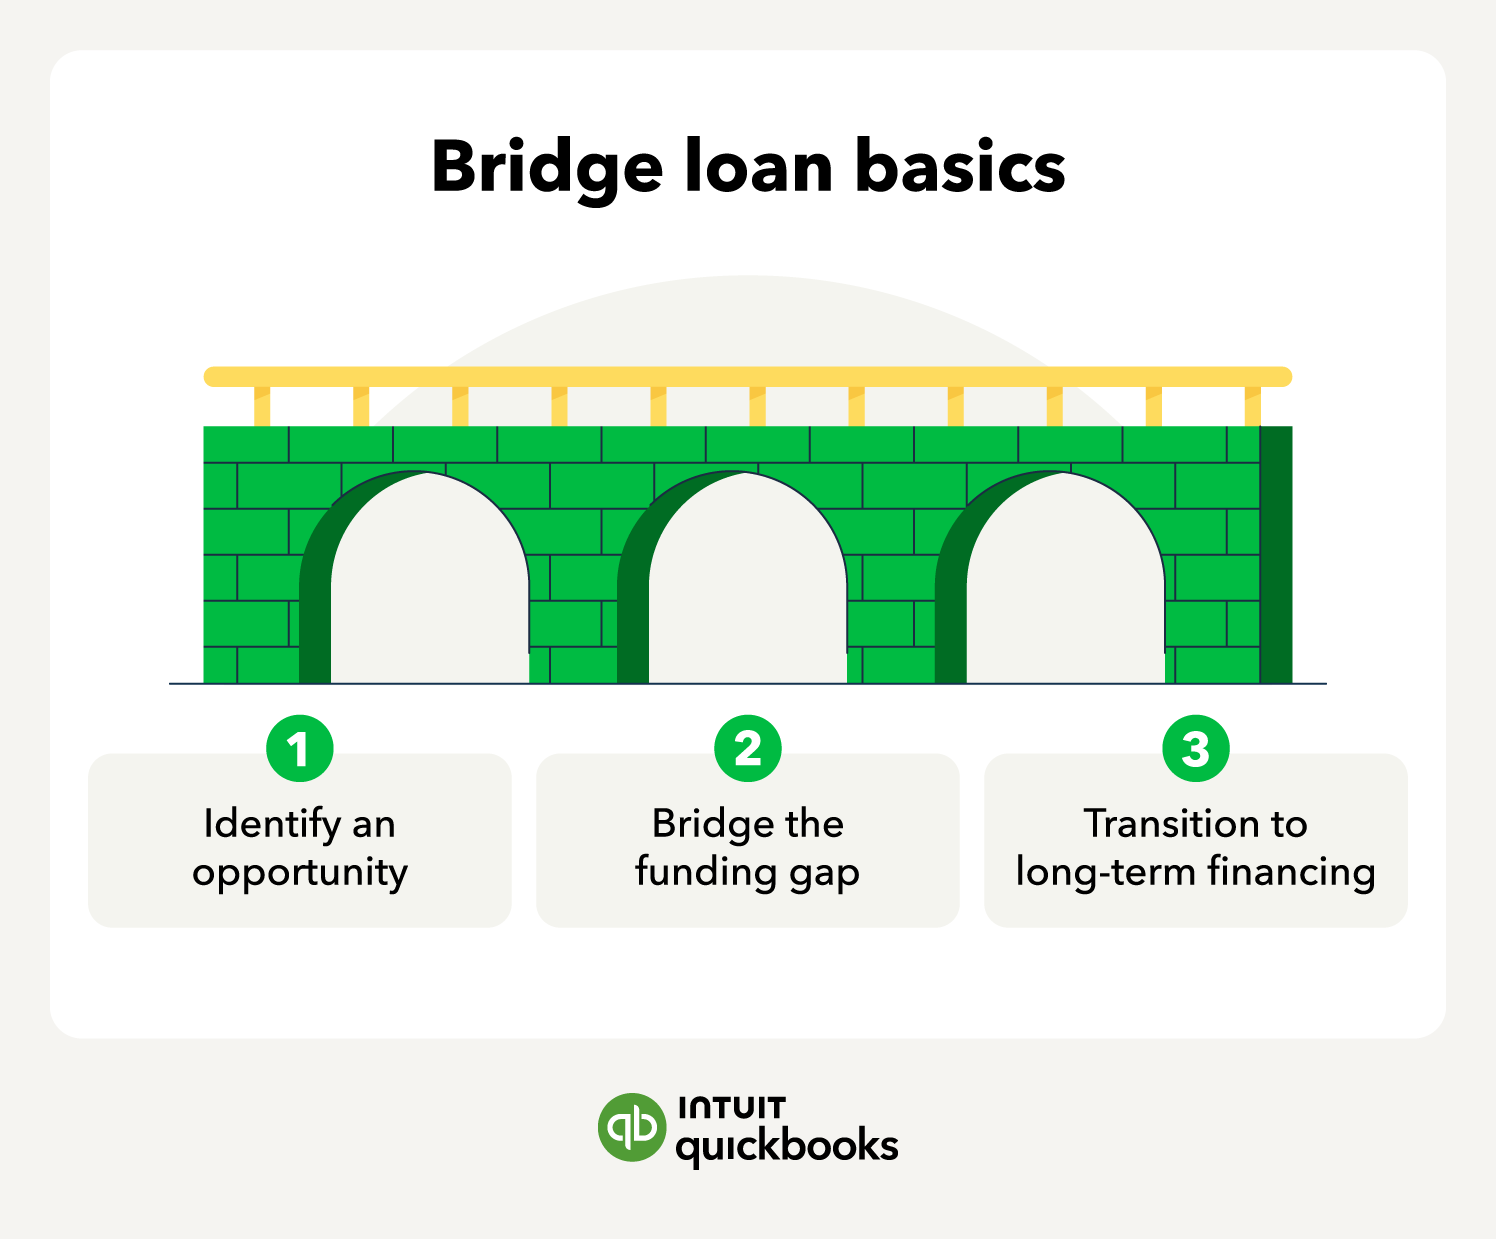 An illustration of the bridge loan basics and how to use one, including using it to transition to long-term financing.